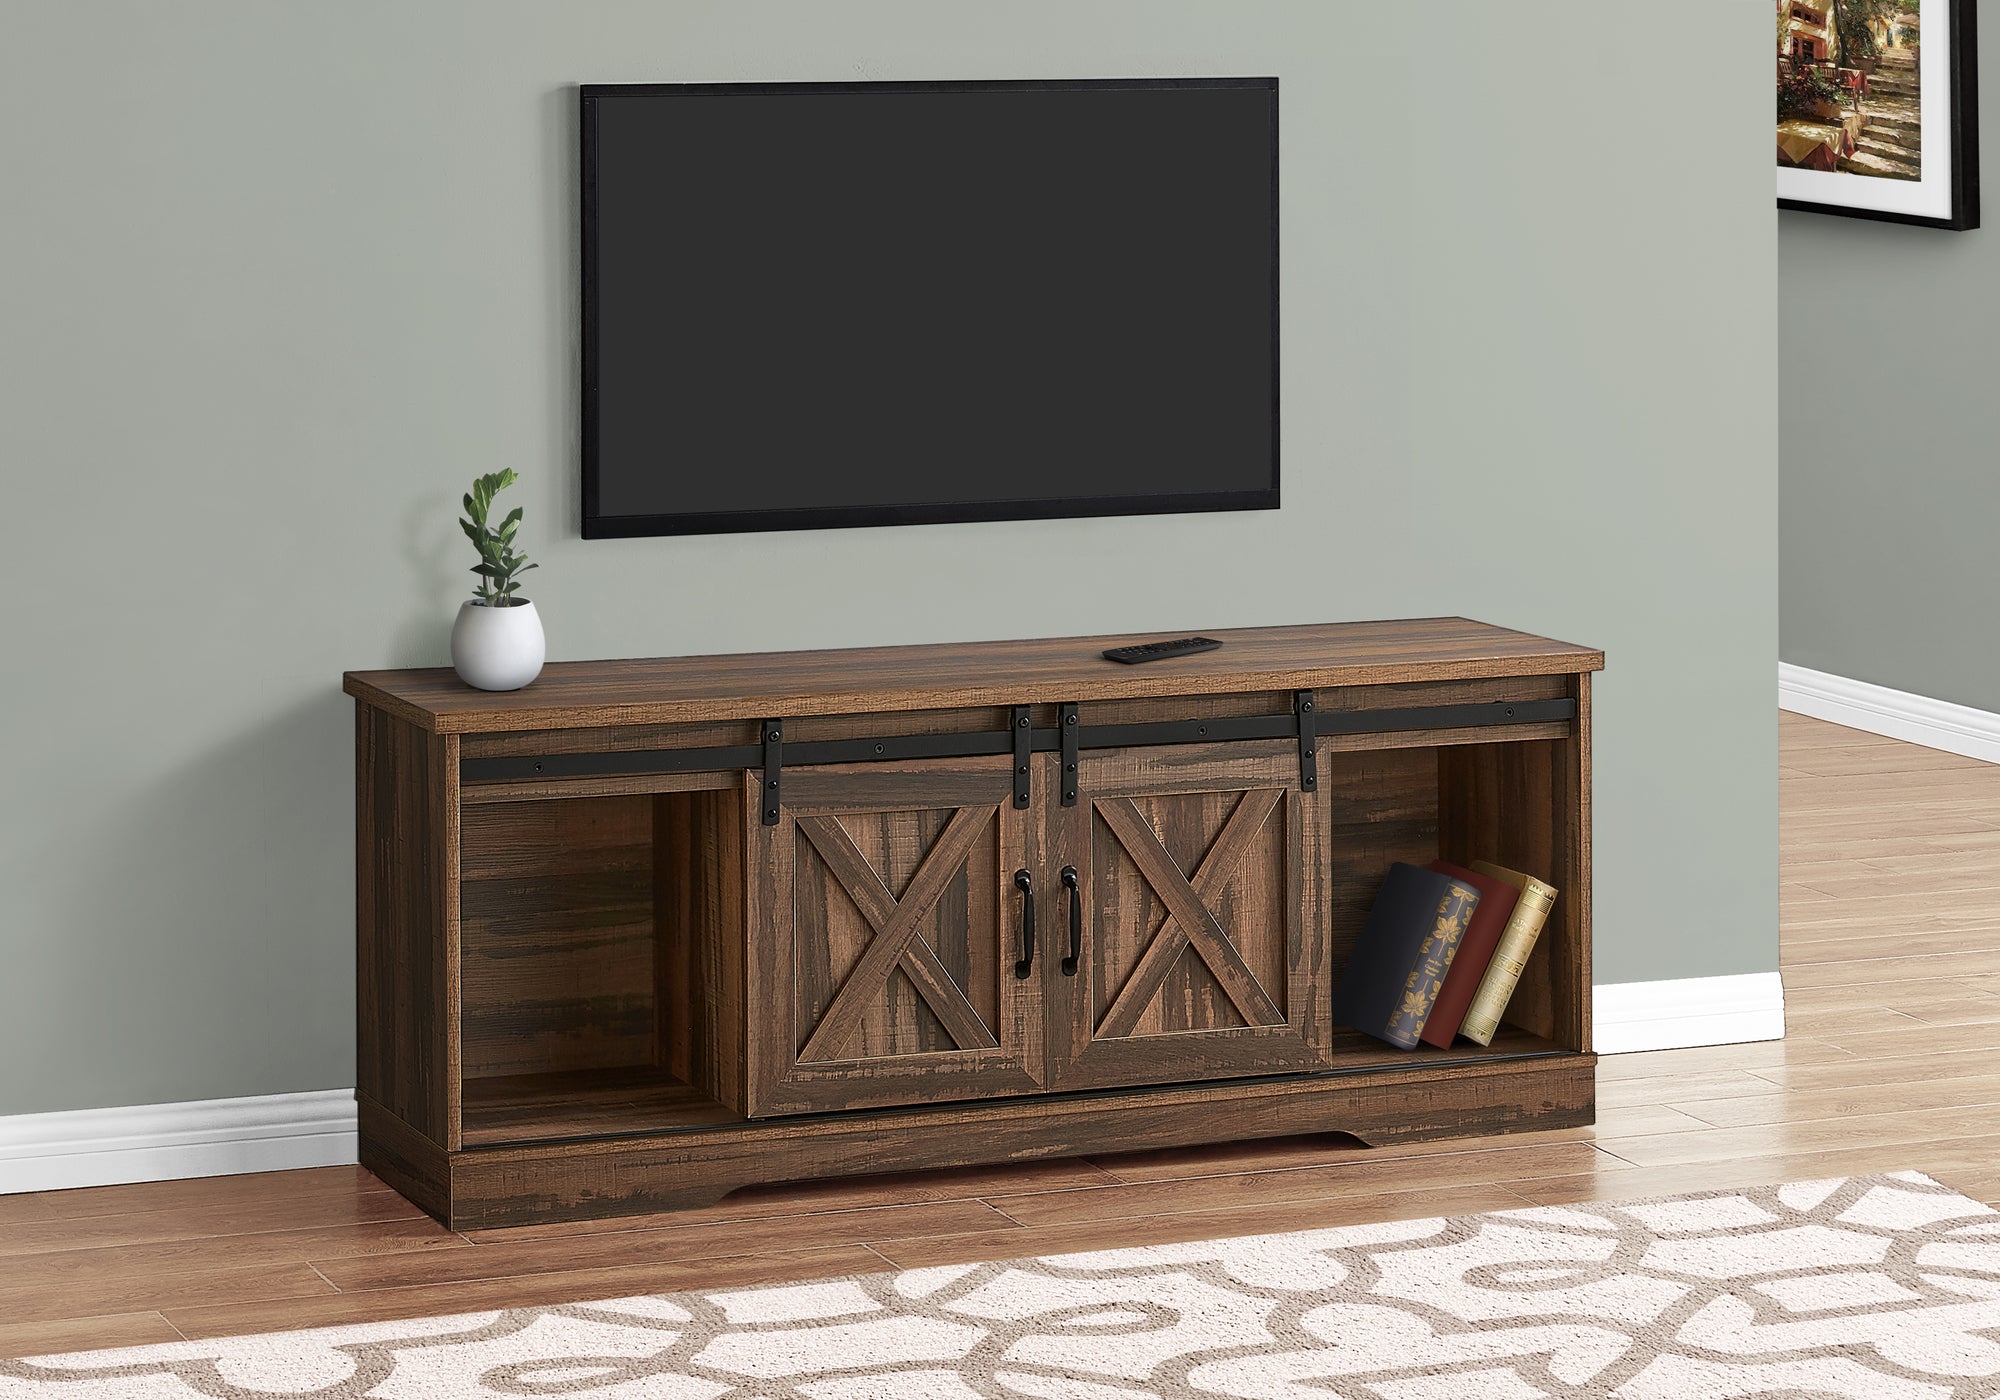 MN-222748    Tv Stand, 60 Inch, Console, Media Entertainment Center, Storage Cabinet, Living Room, Bedroom, Laminate, Metal, Brown Reclaimed Wood Look, Contemporary, Modern